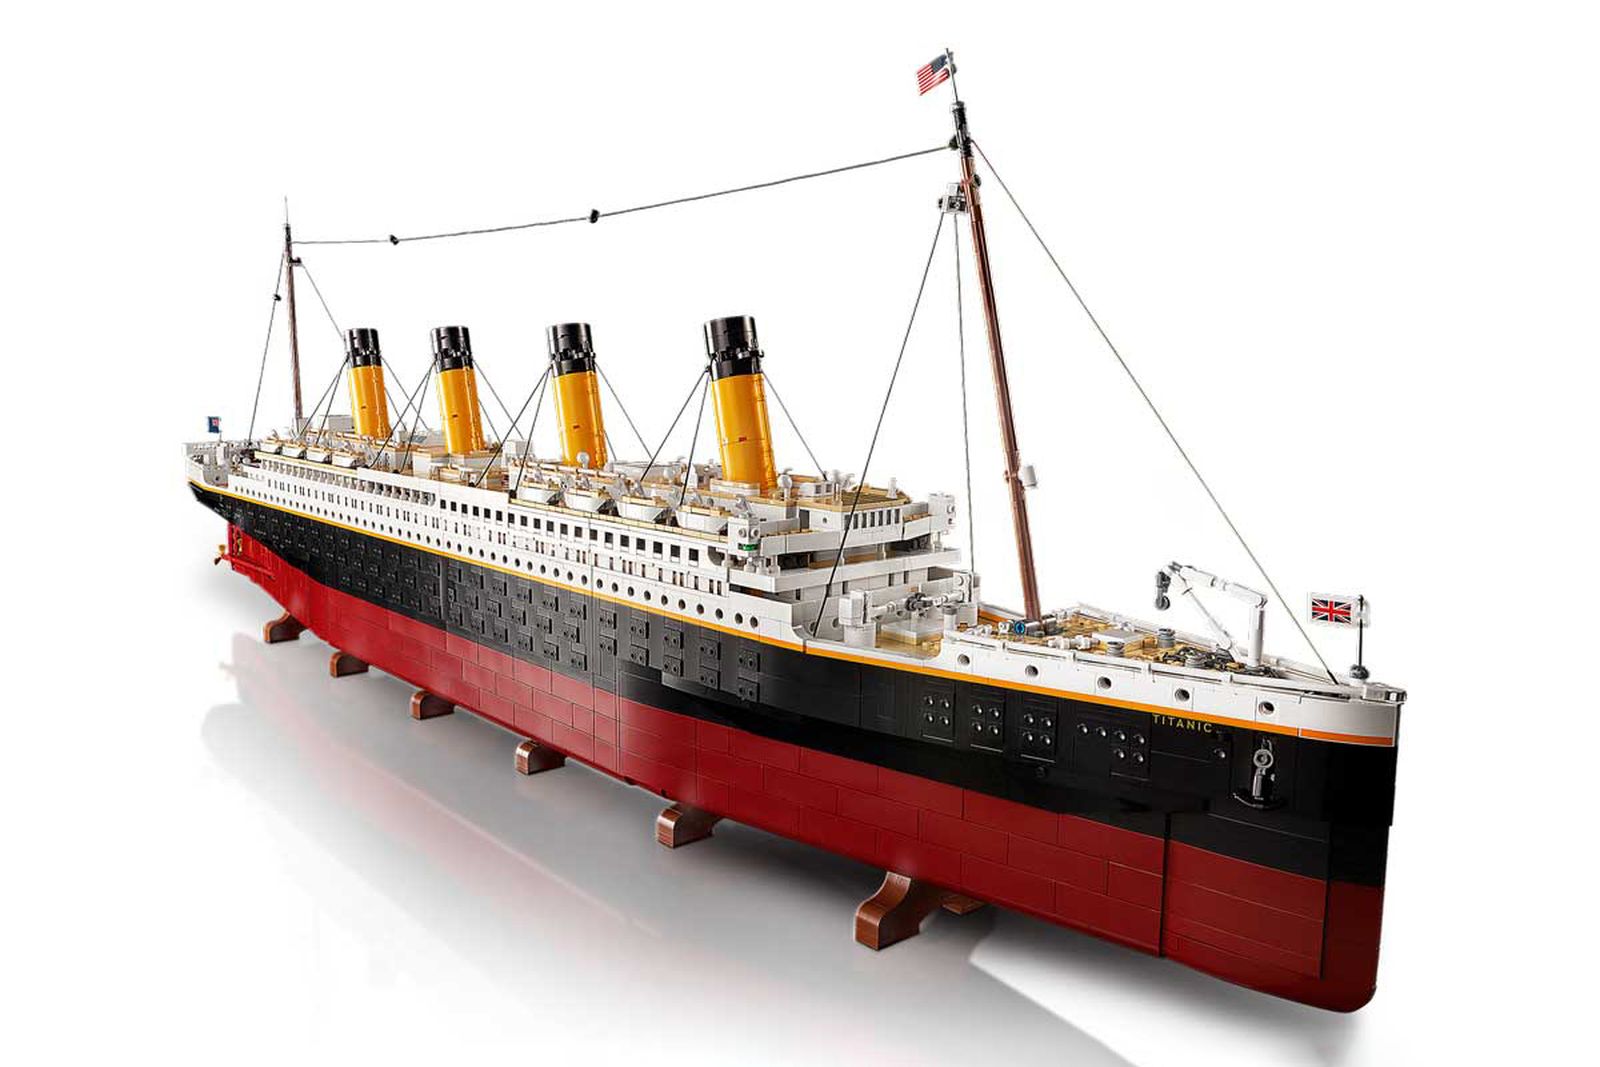 LEGO's Titanic Model Is Its Biggest Ever: Here's to Buy